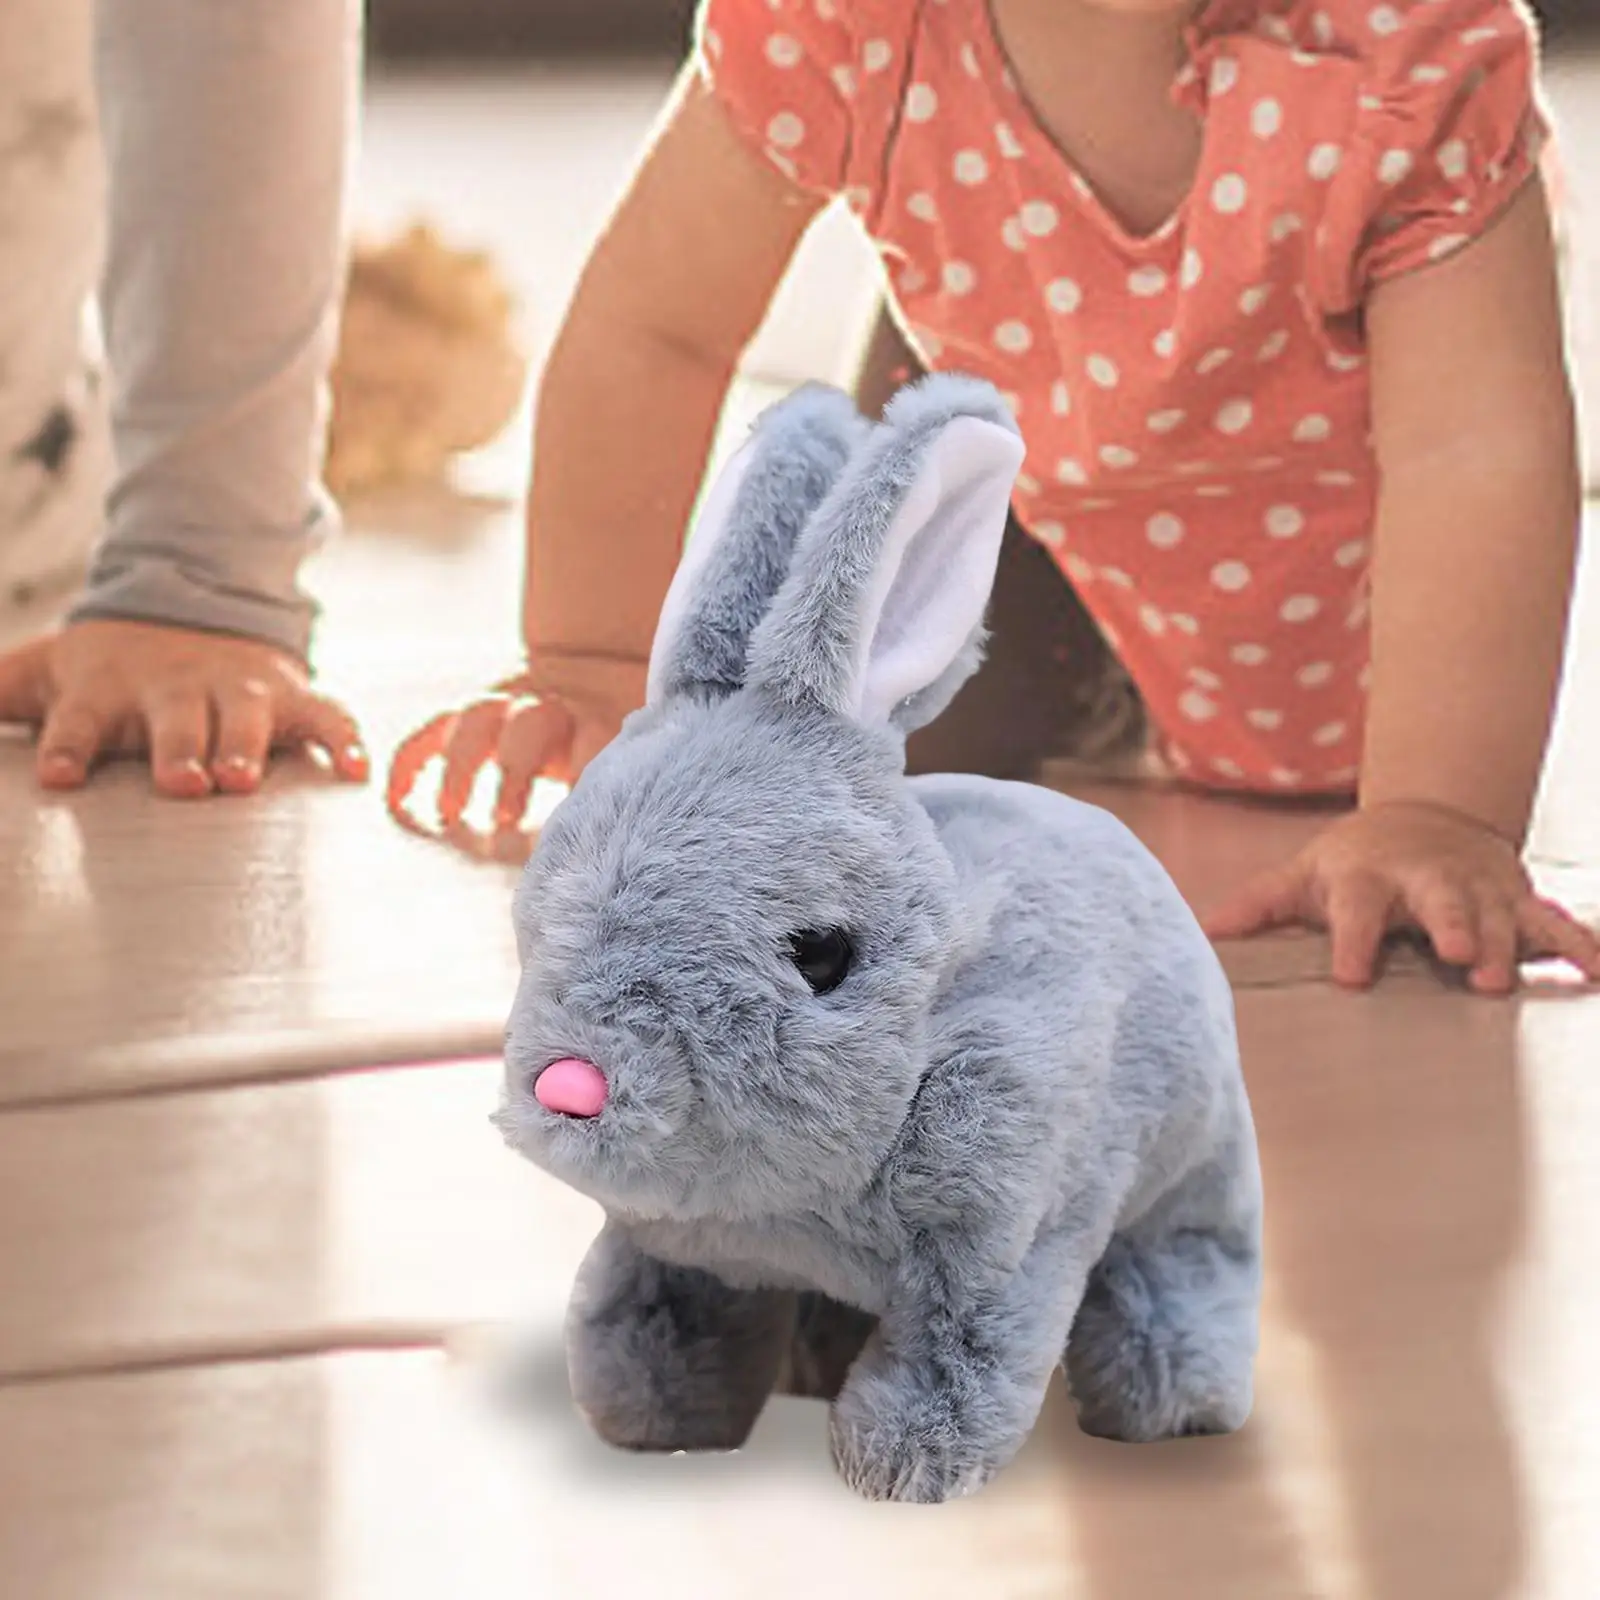 Electronic Plush Rabbit Toy Stuffed Animal Adorable for Gifts Party Favors